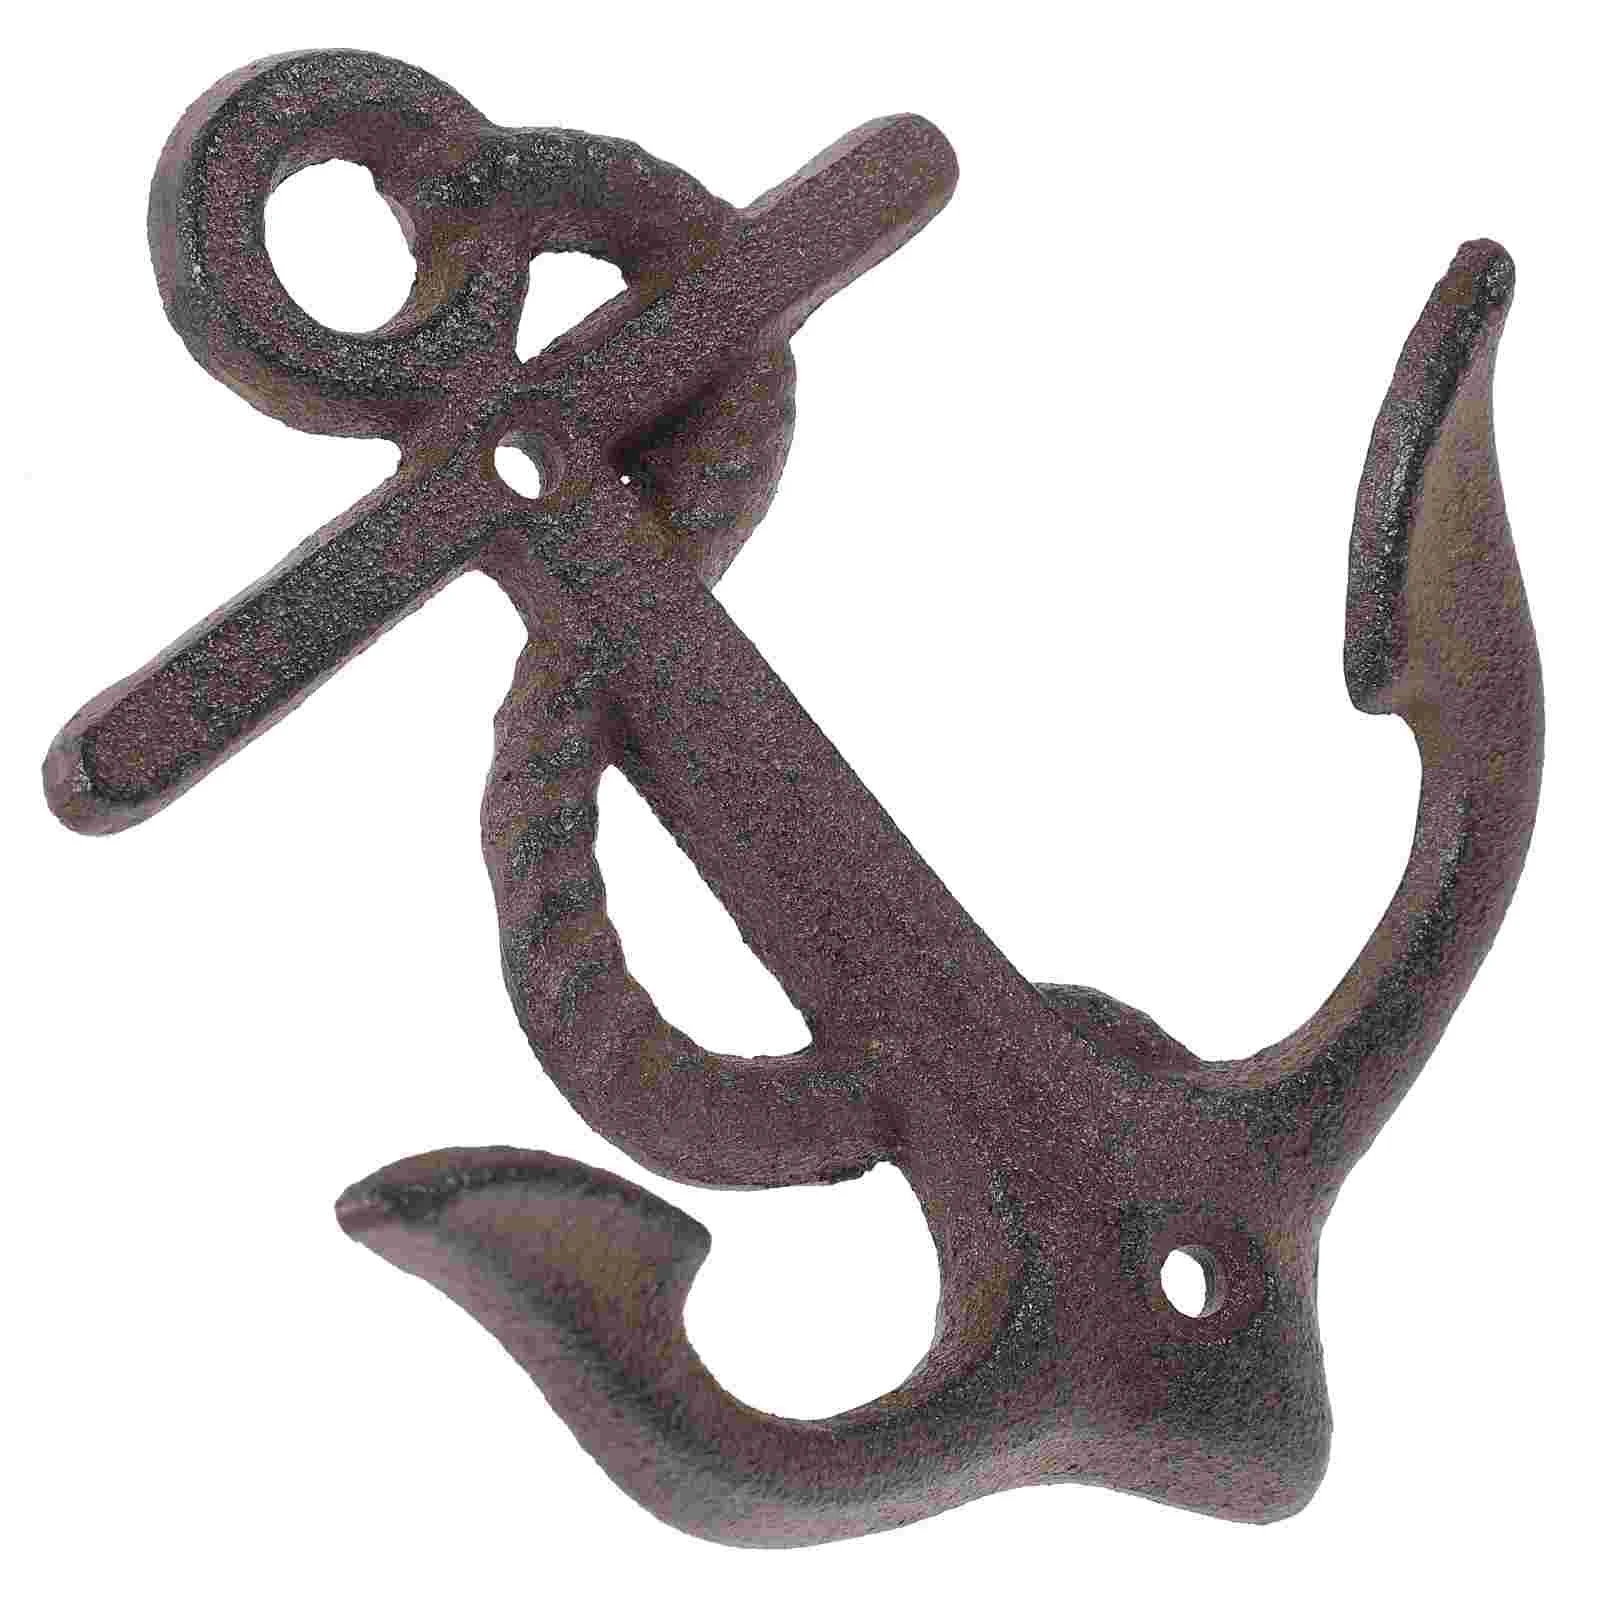 

Home Hanging Hook Wrought Iron Decorate Décor Wall Hooks Heavy Duty Cast Rustic Key Hanger